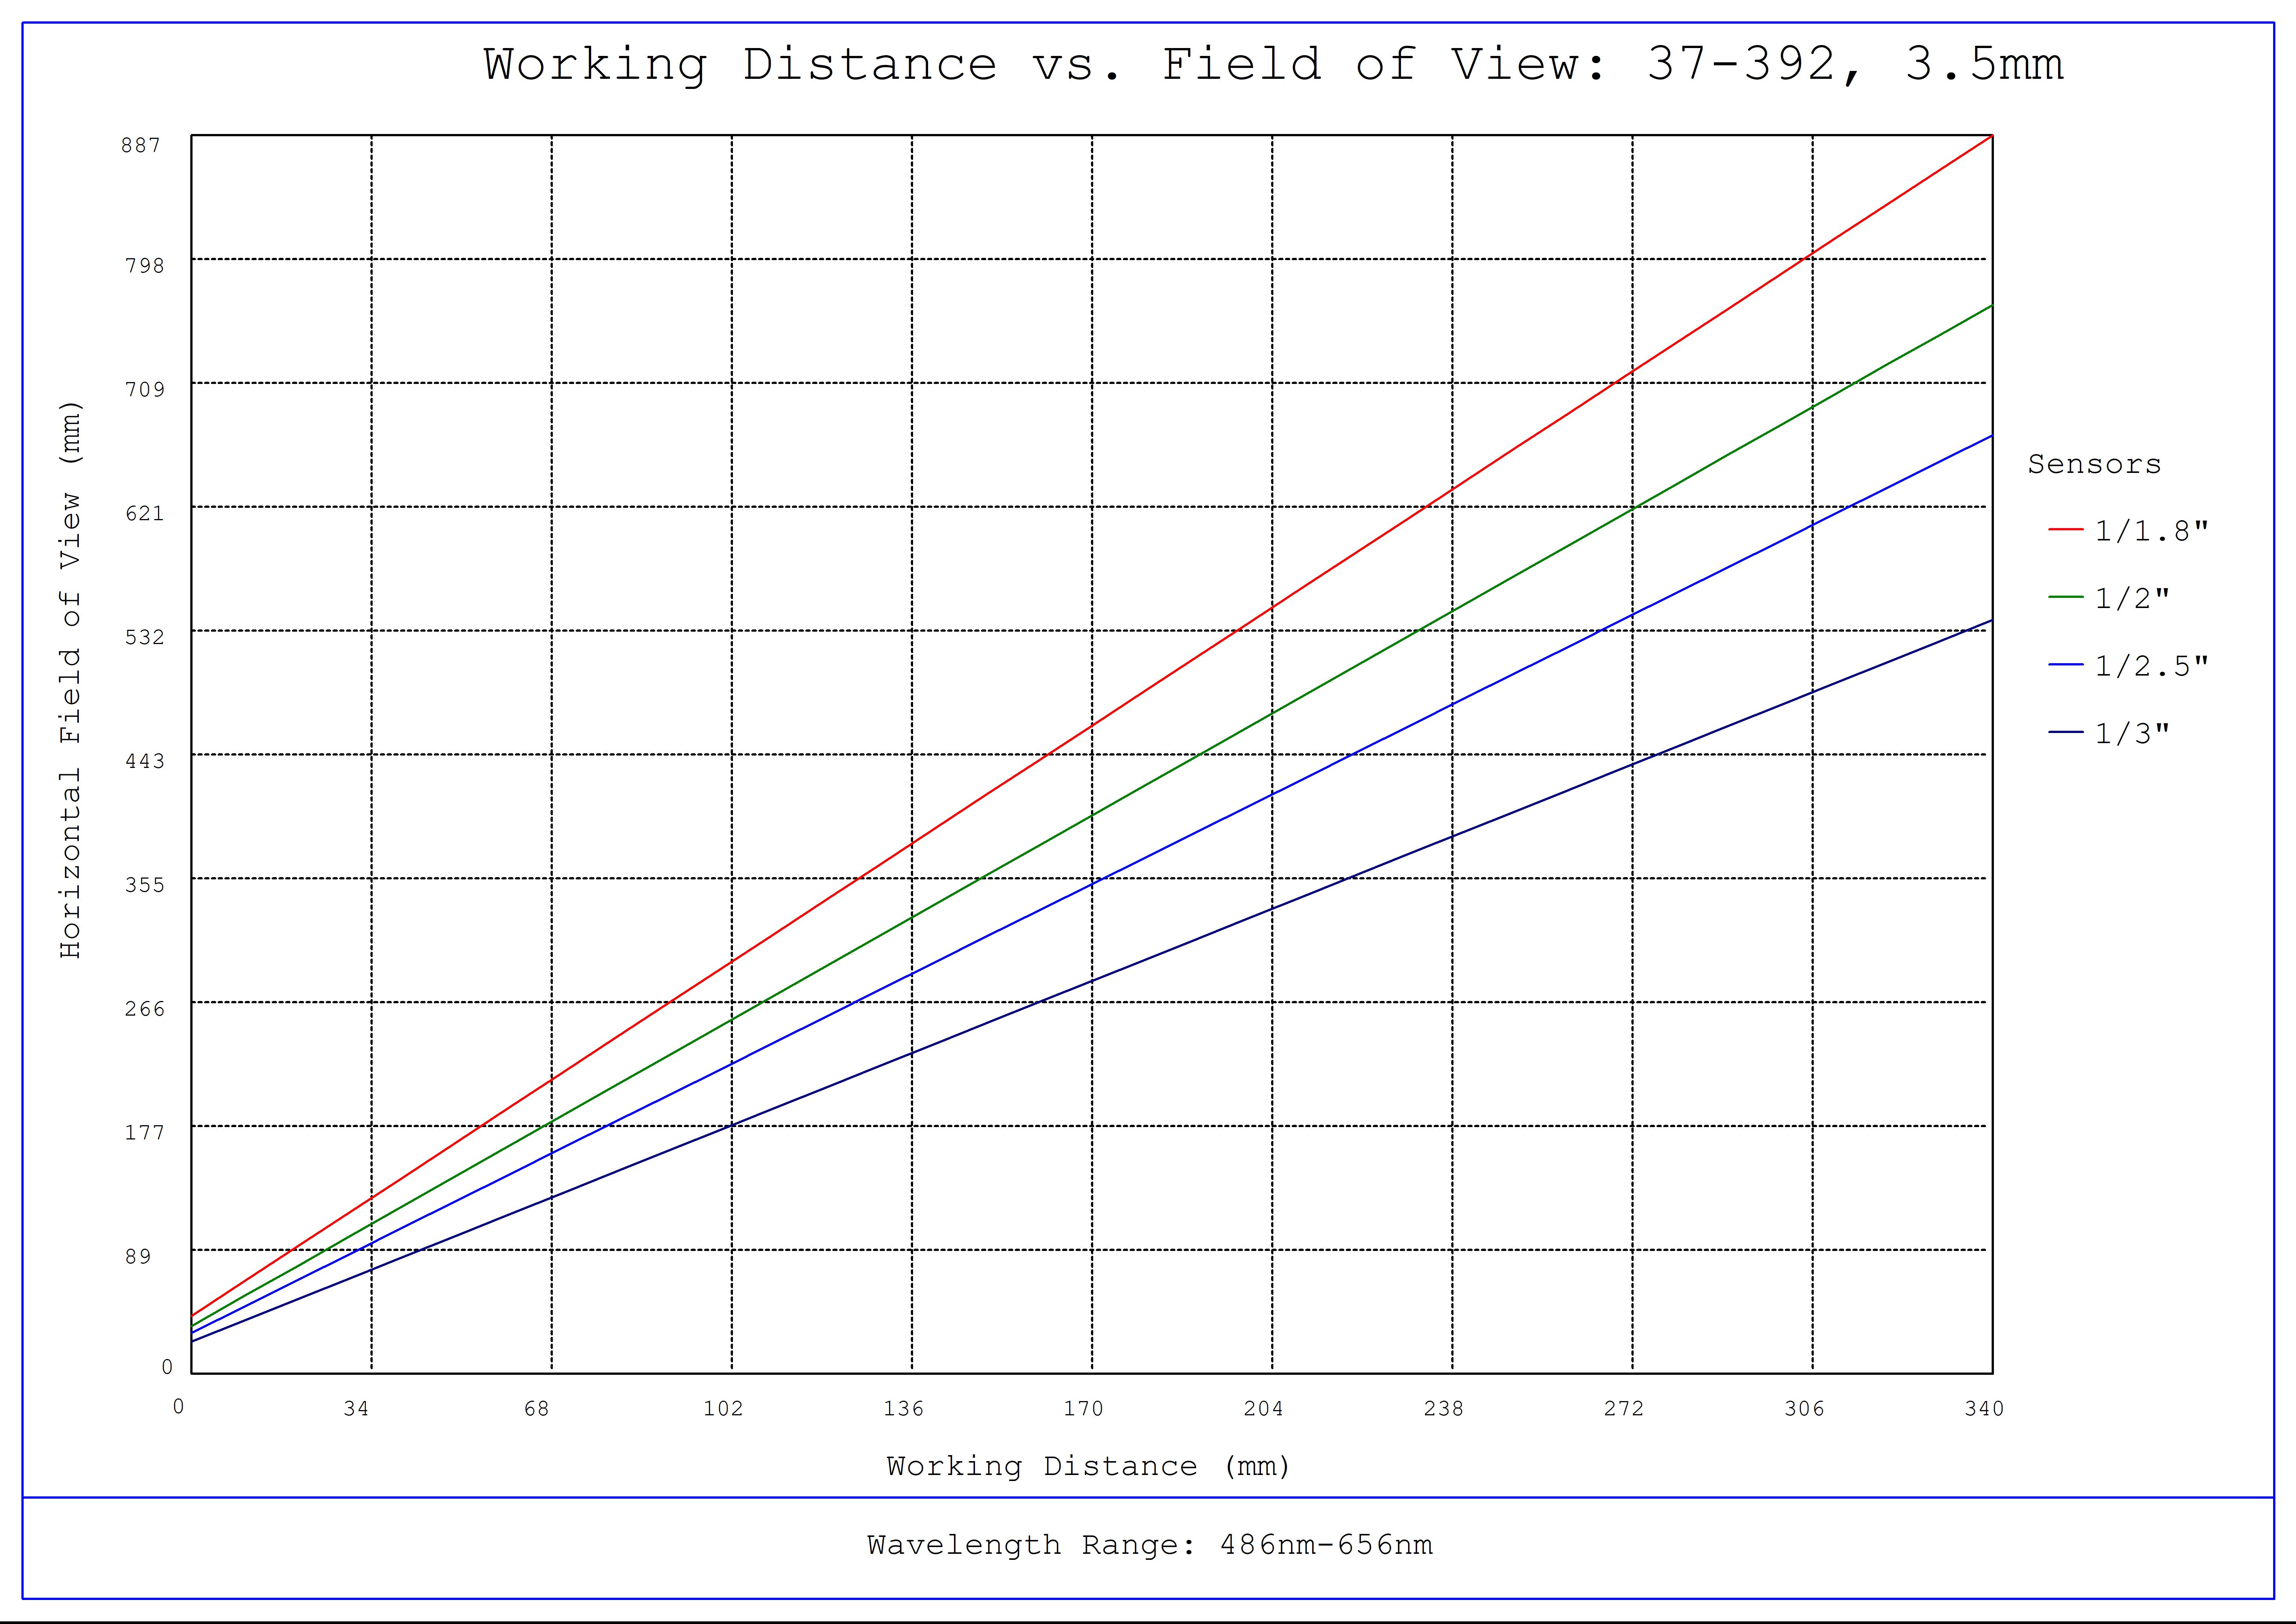 #37-392, 3.5mm, f/2 Cr Series Fixed Focal Length Lens, Working Distance versus Field of View Plot